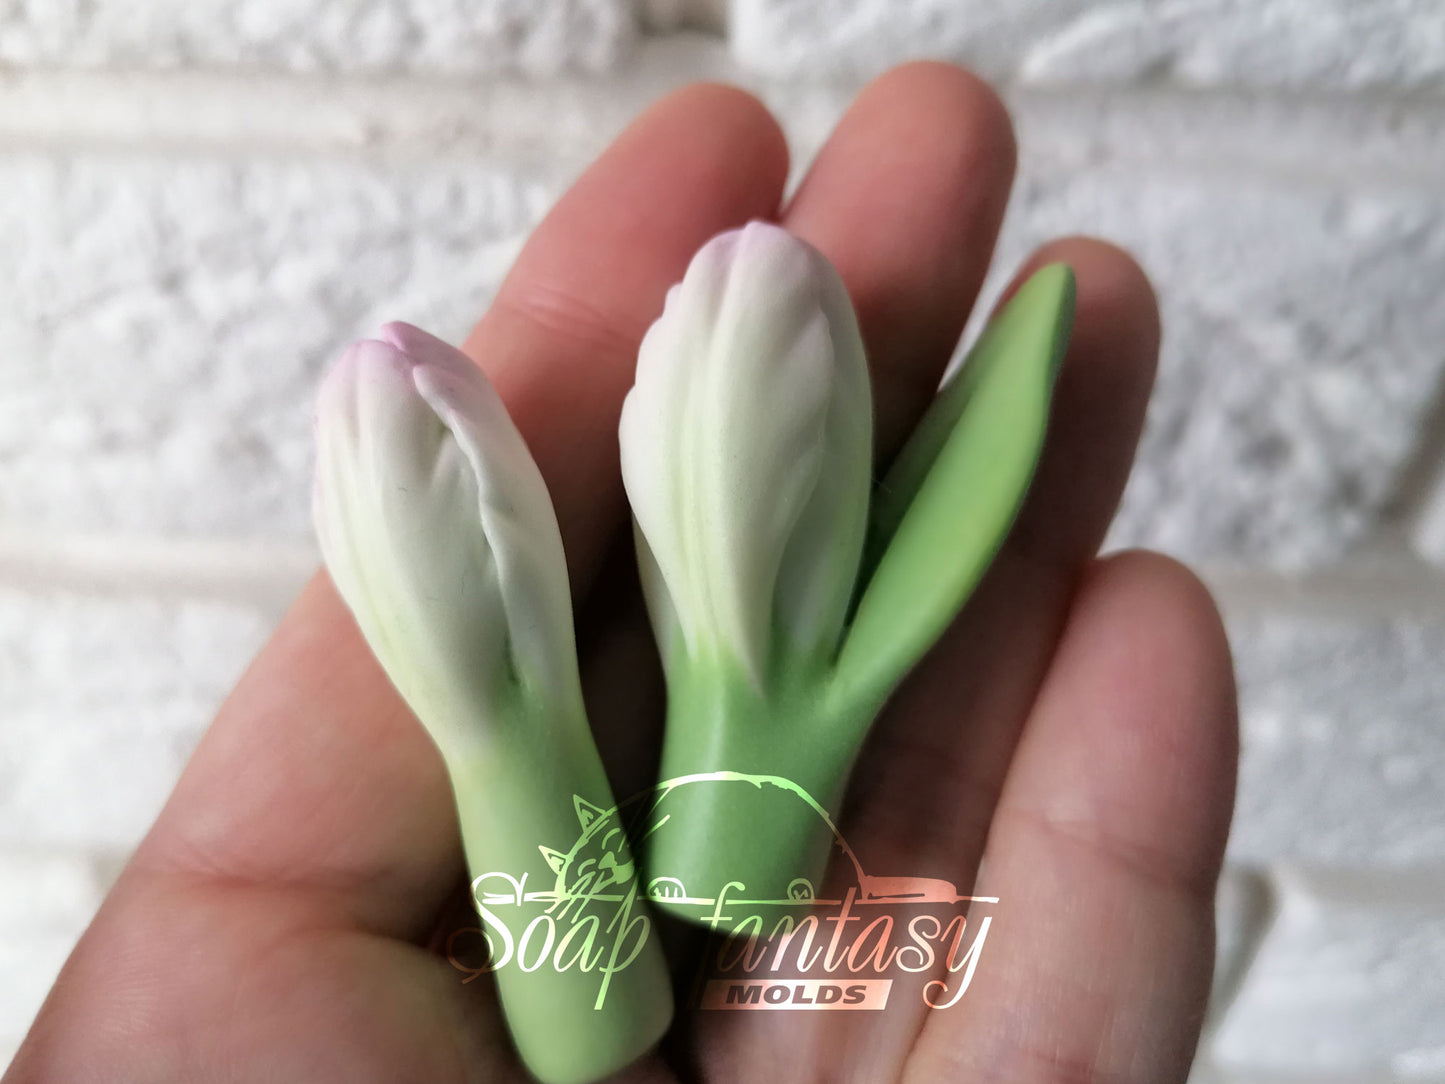 Alstroemeria lily 2 separate buds silicone soap mold for M&P soap making